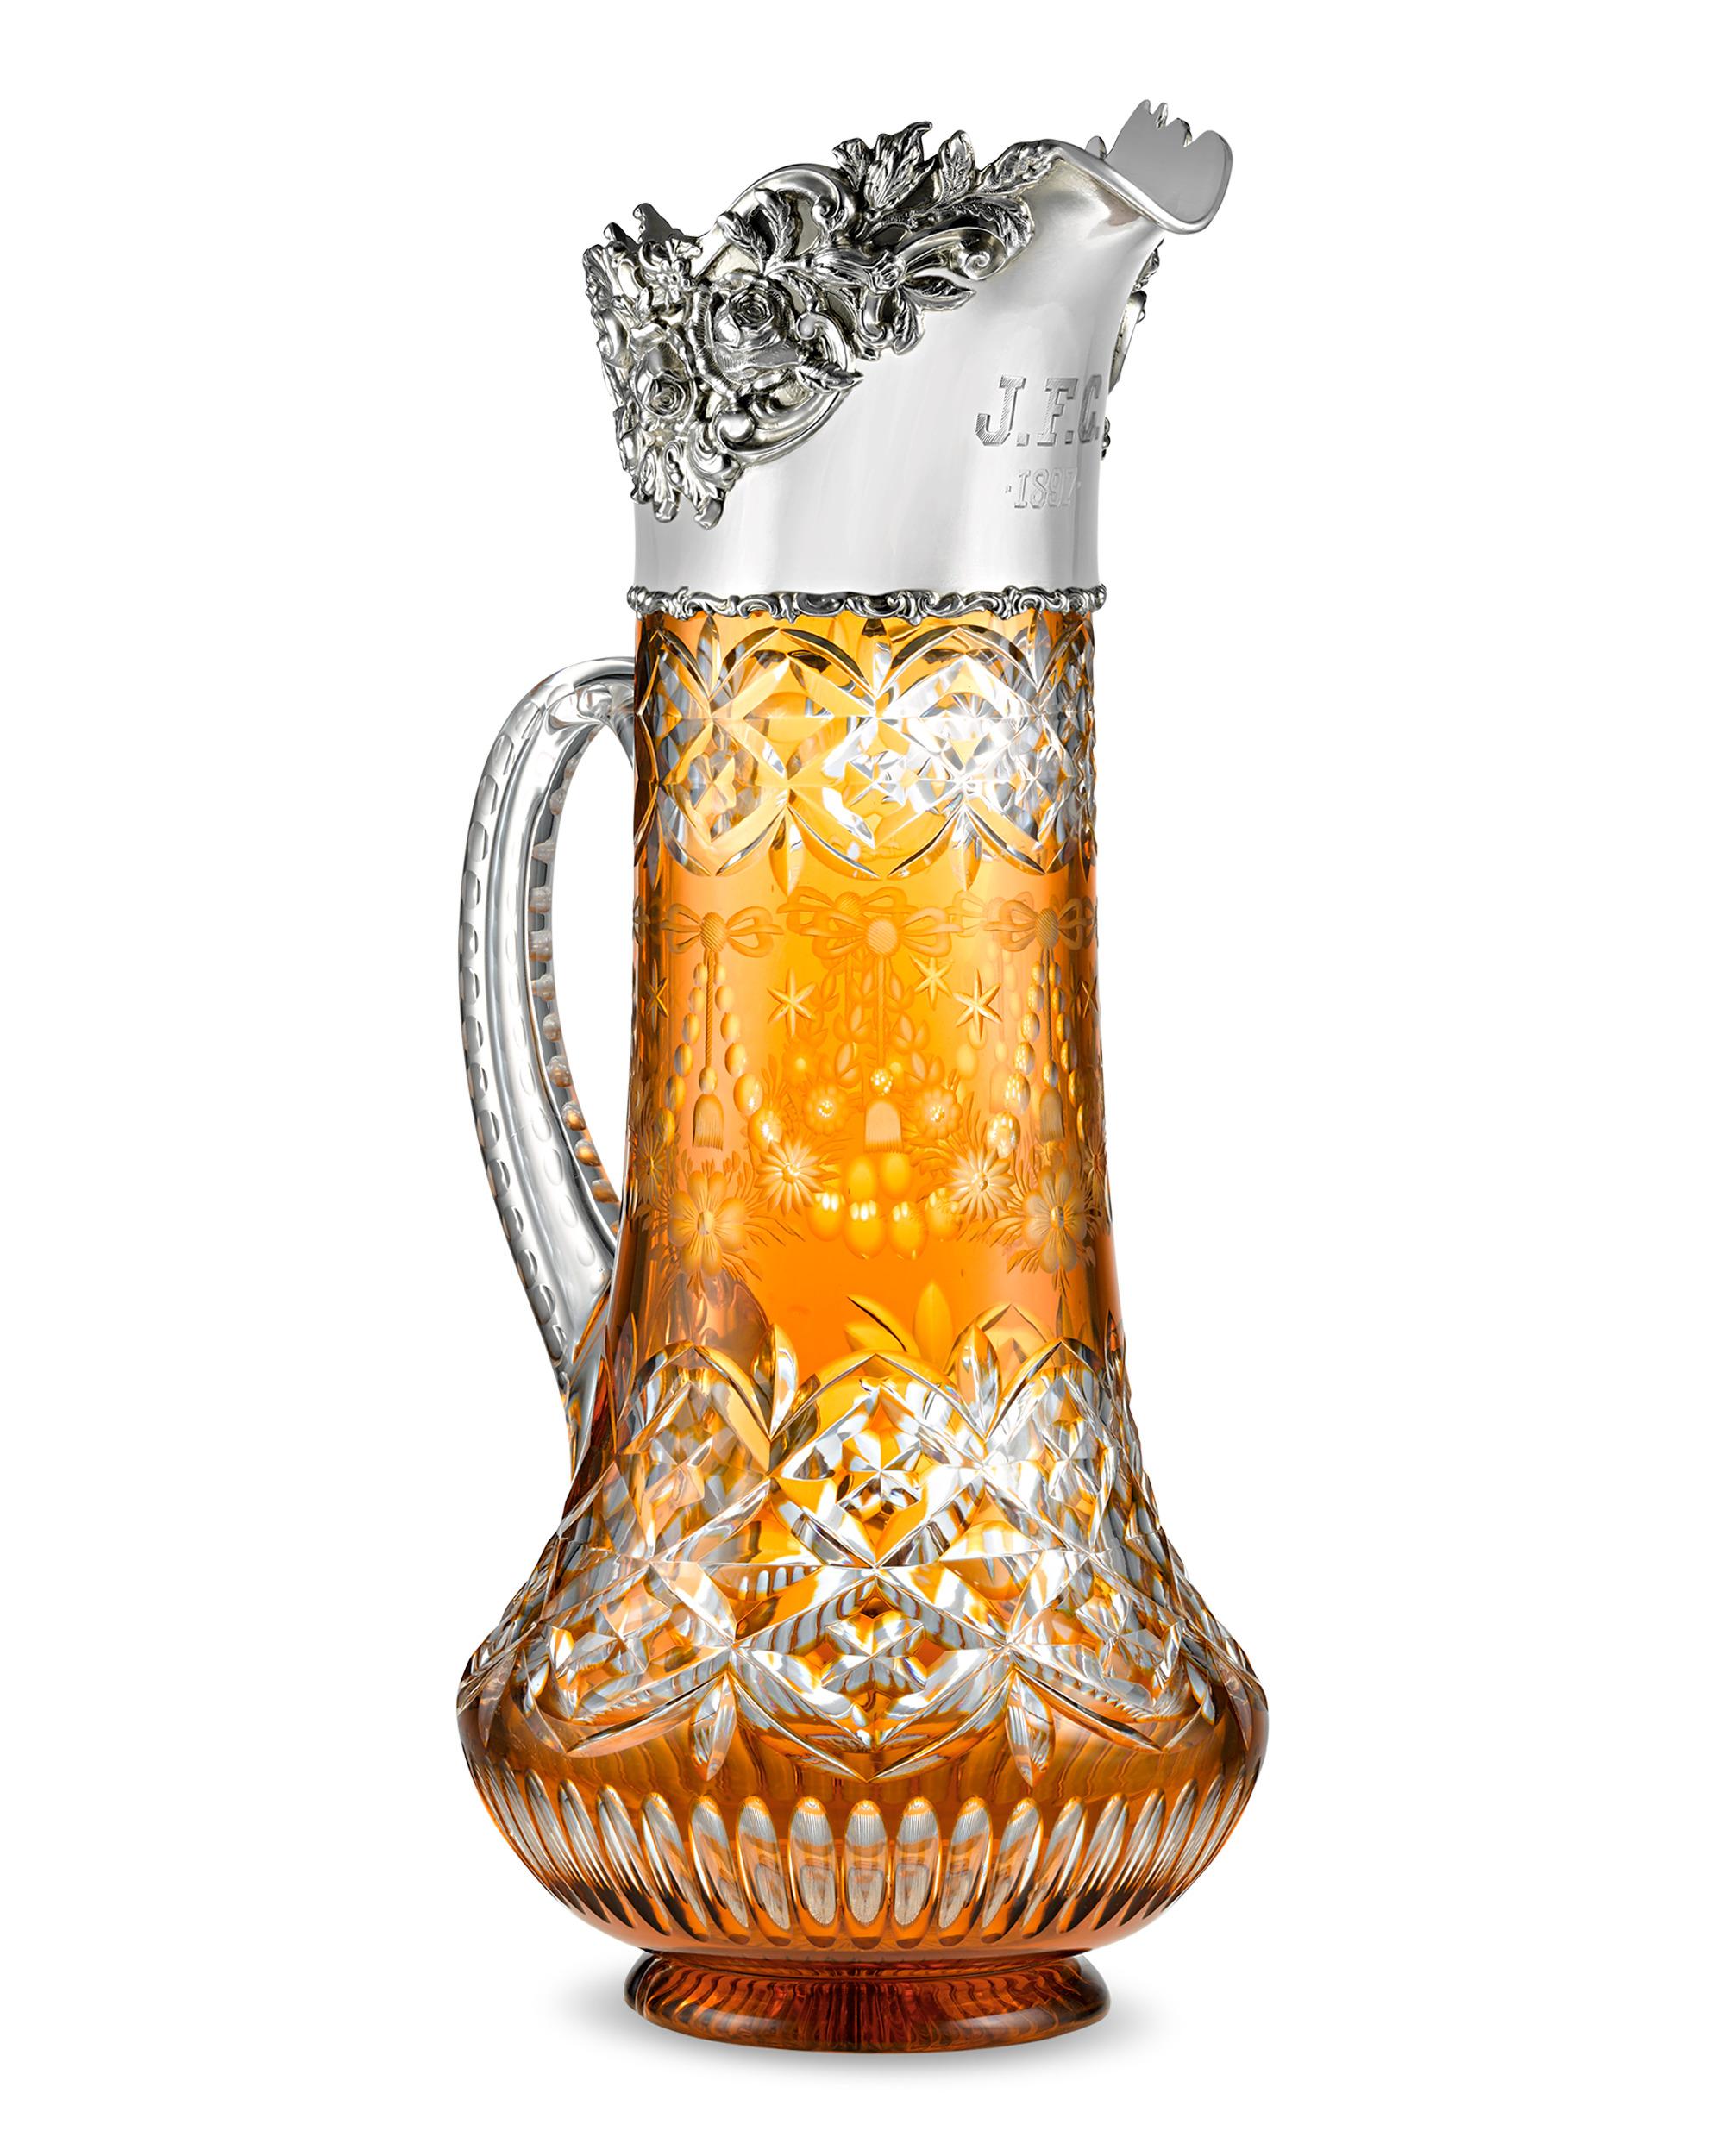 This stunning and rare jug by renowned British glassmakers Stevens & Williams features an exquisite butterscotch Cut to Clear design with scrolling foliate motifs. Beyond its coveted orange color, the jug's sterling silver rim by Philadelphia-based